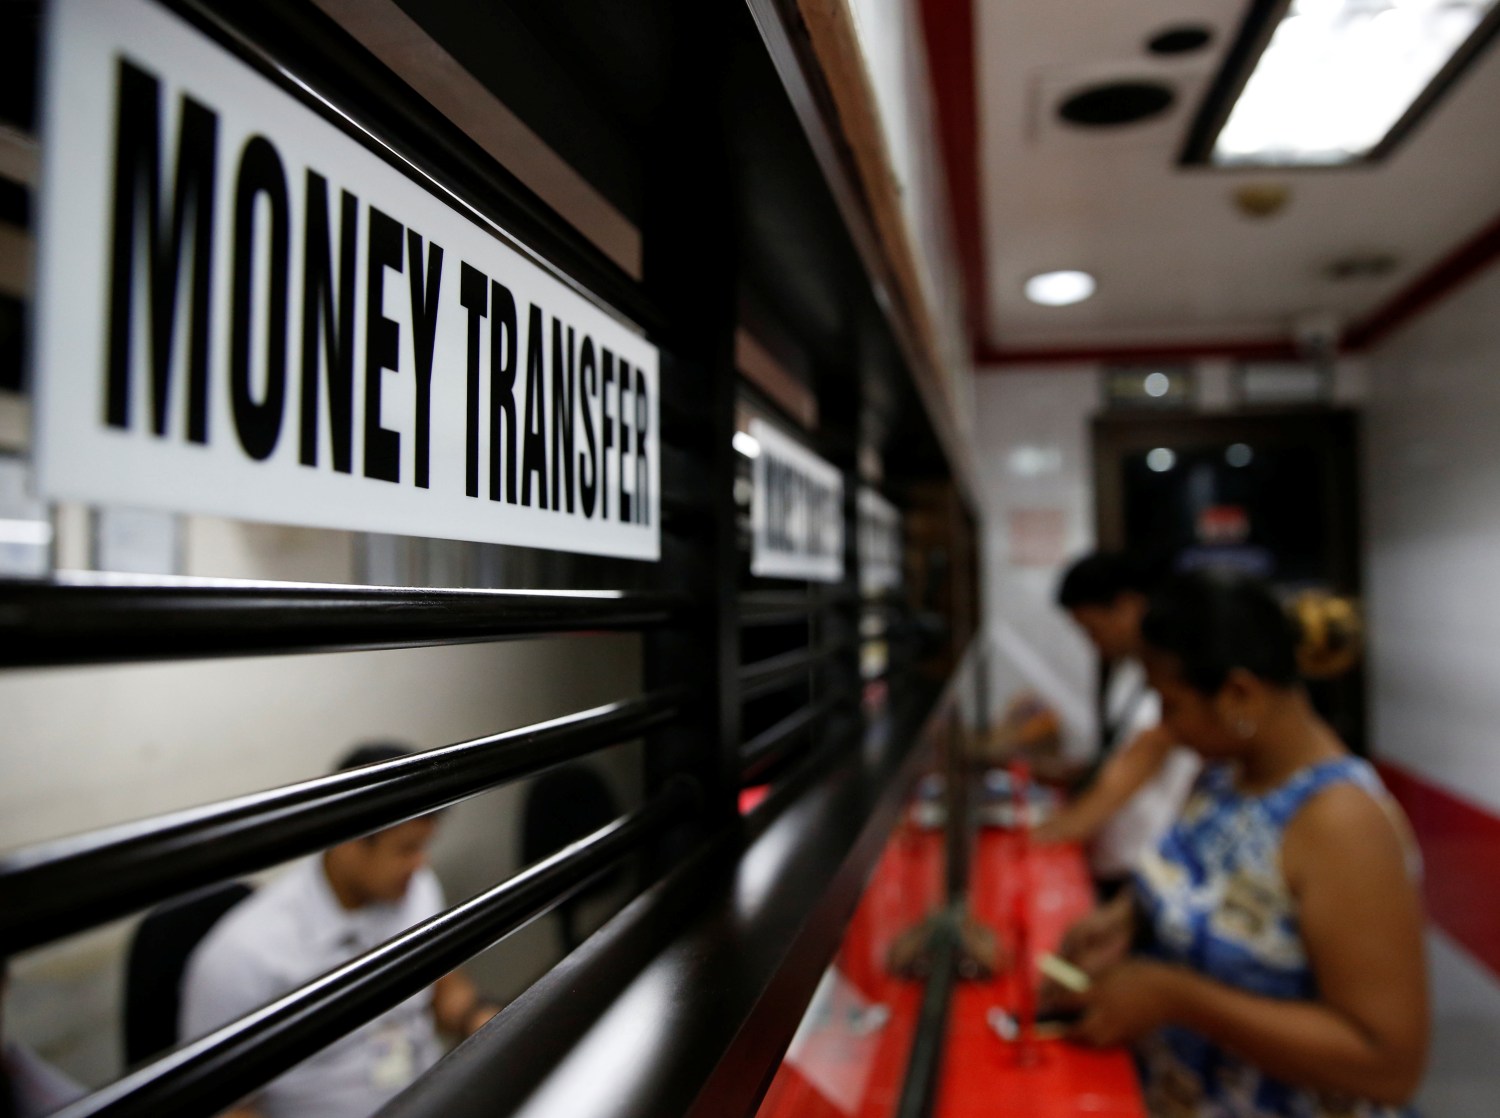 Customers receive money from families working abroad at a money remittance center in Makati City, Metro Manila, Philippines, September 19, 2018. REUTERS/Eloisa Lopez